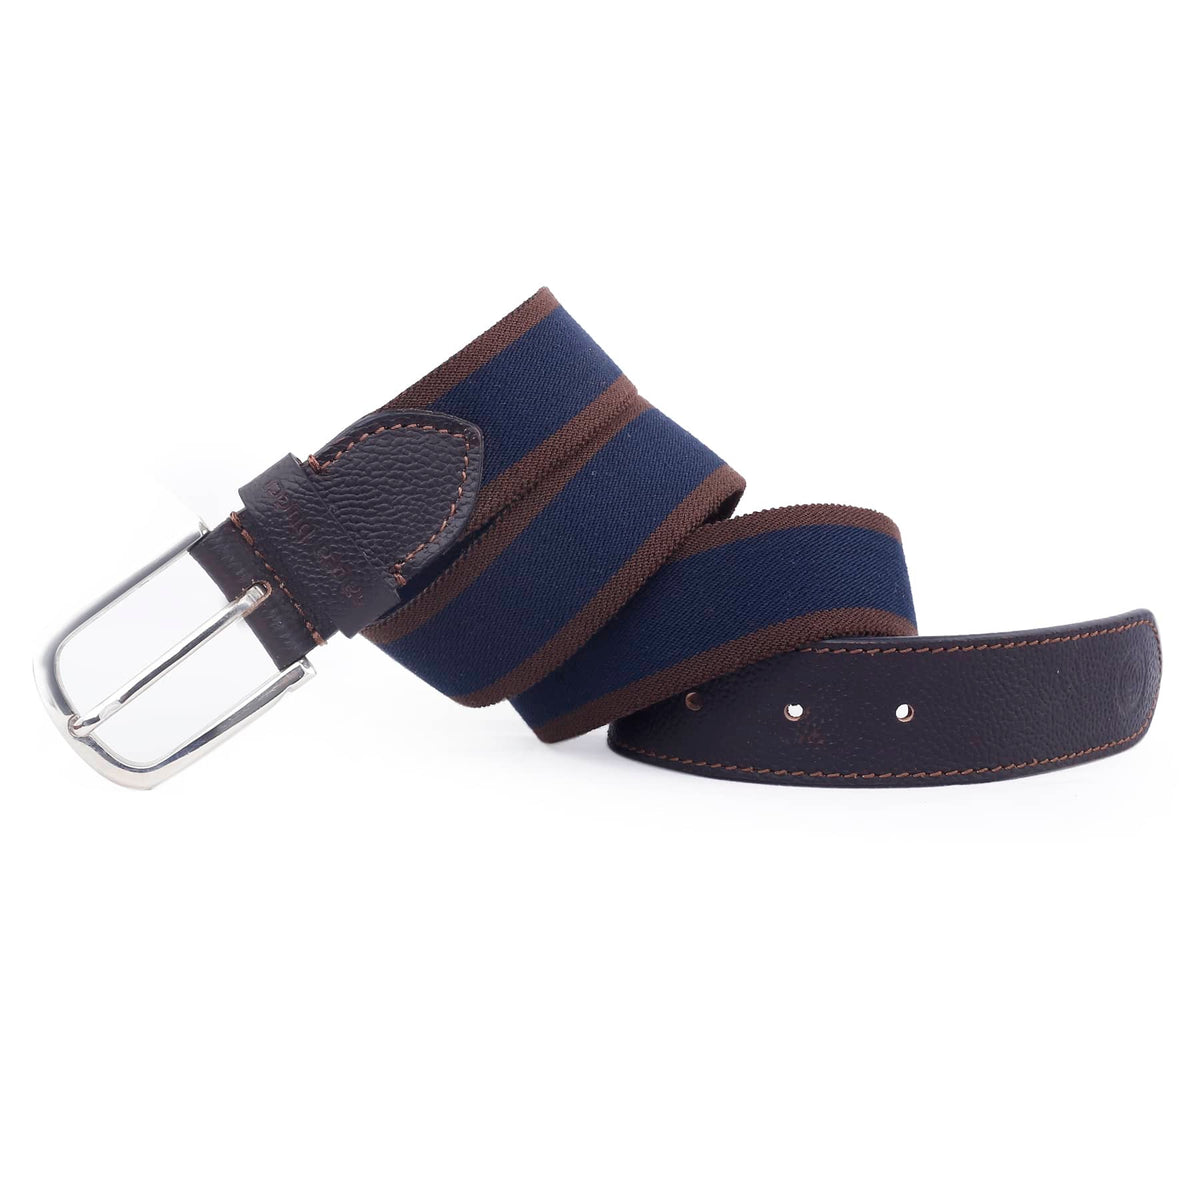 Bacca Bucci Genuine Leather Formal Dress Belts with a Stylish Finish & a  Nickel-Free Buckle